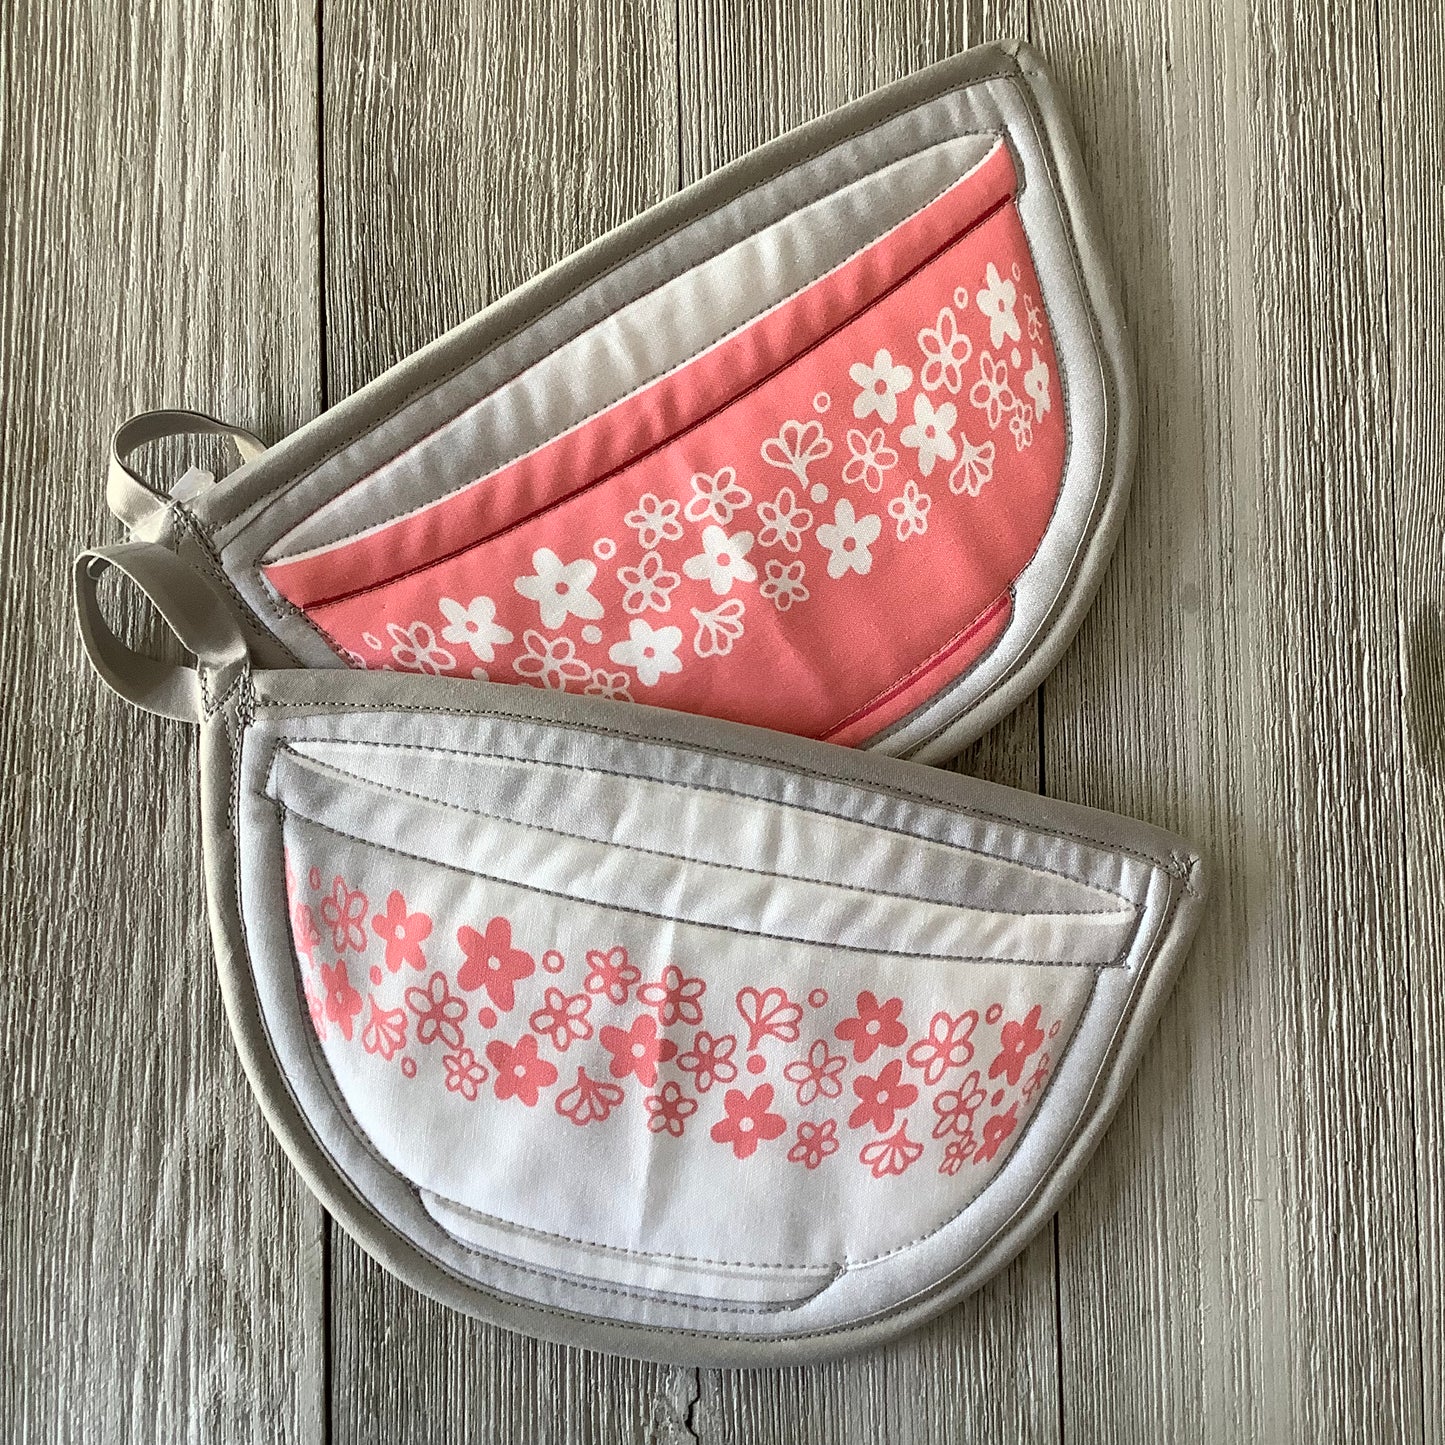 Vintage Inspired Pyrex Oven Mitts